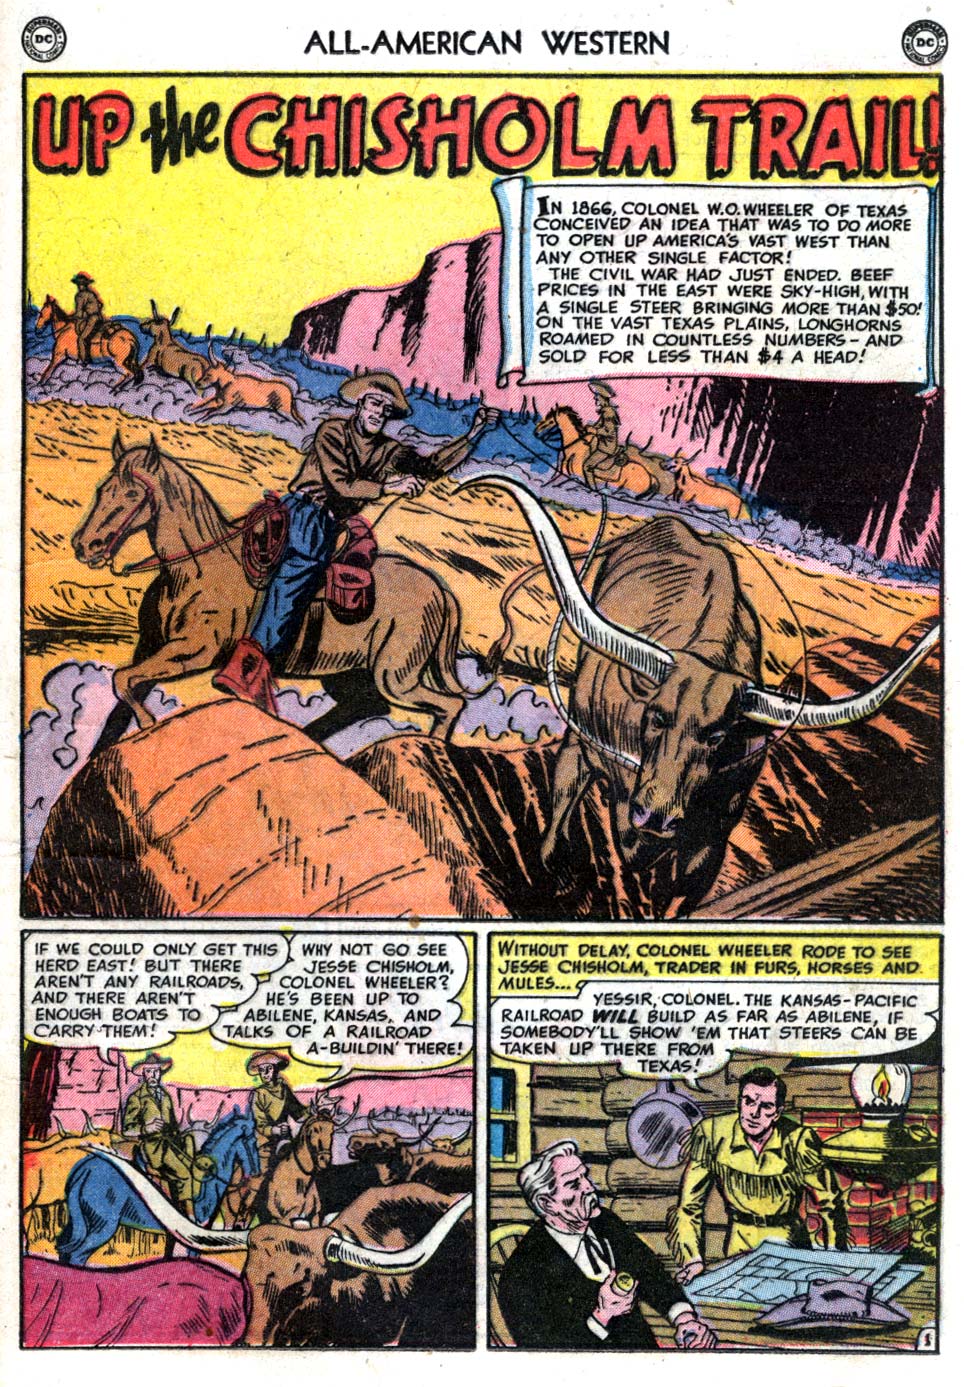 Read online All-American Western comic -  Issue #113 - 37